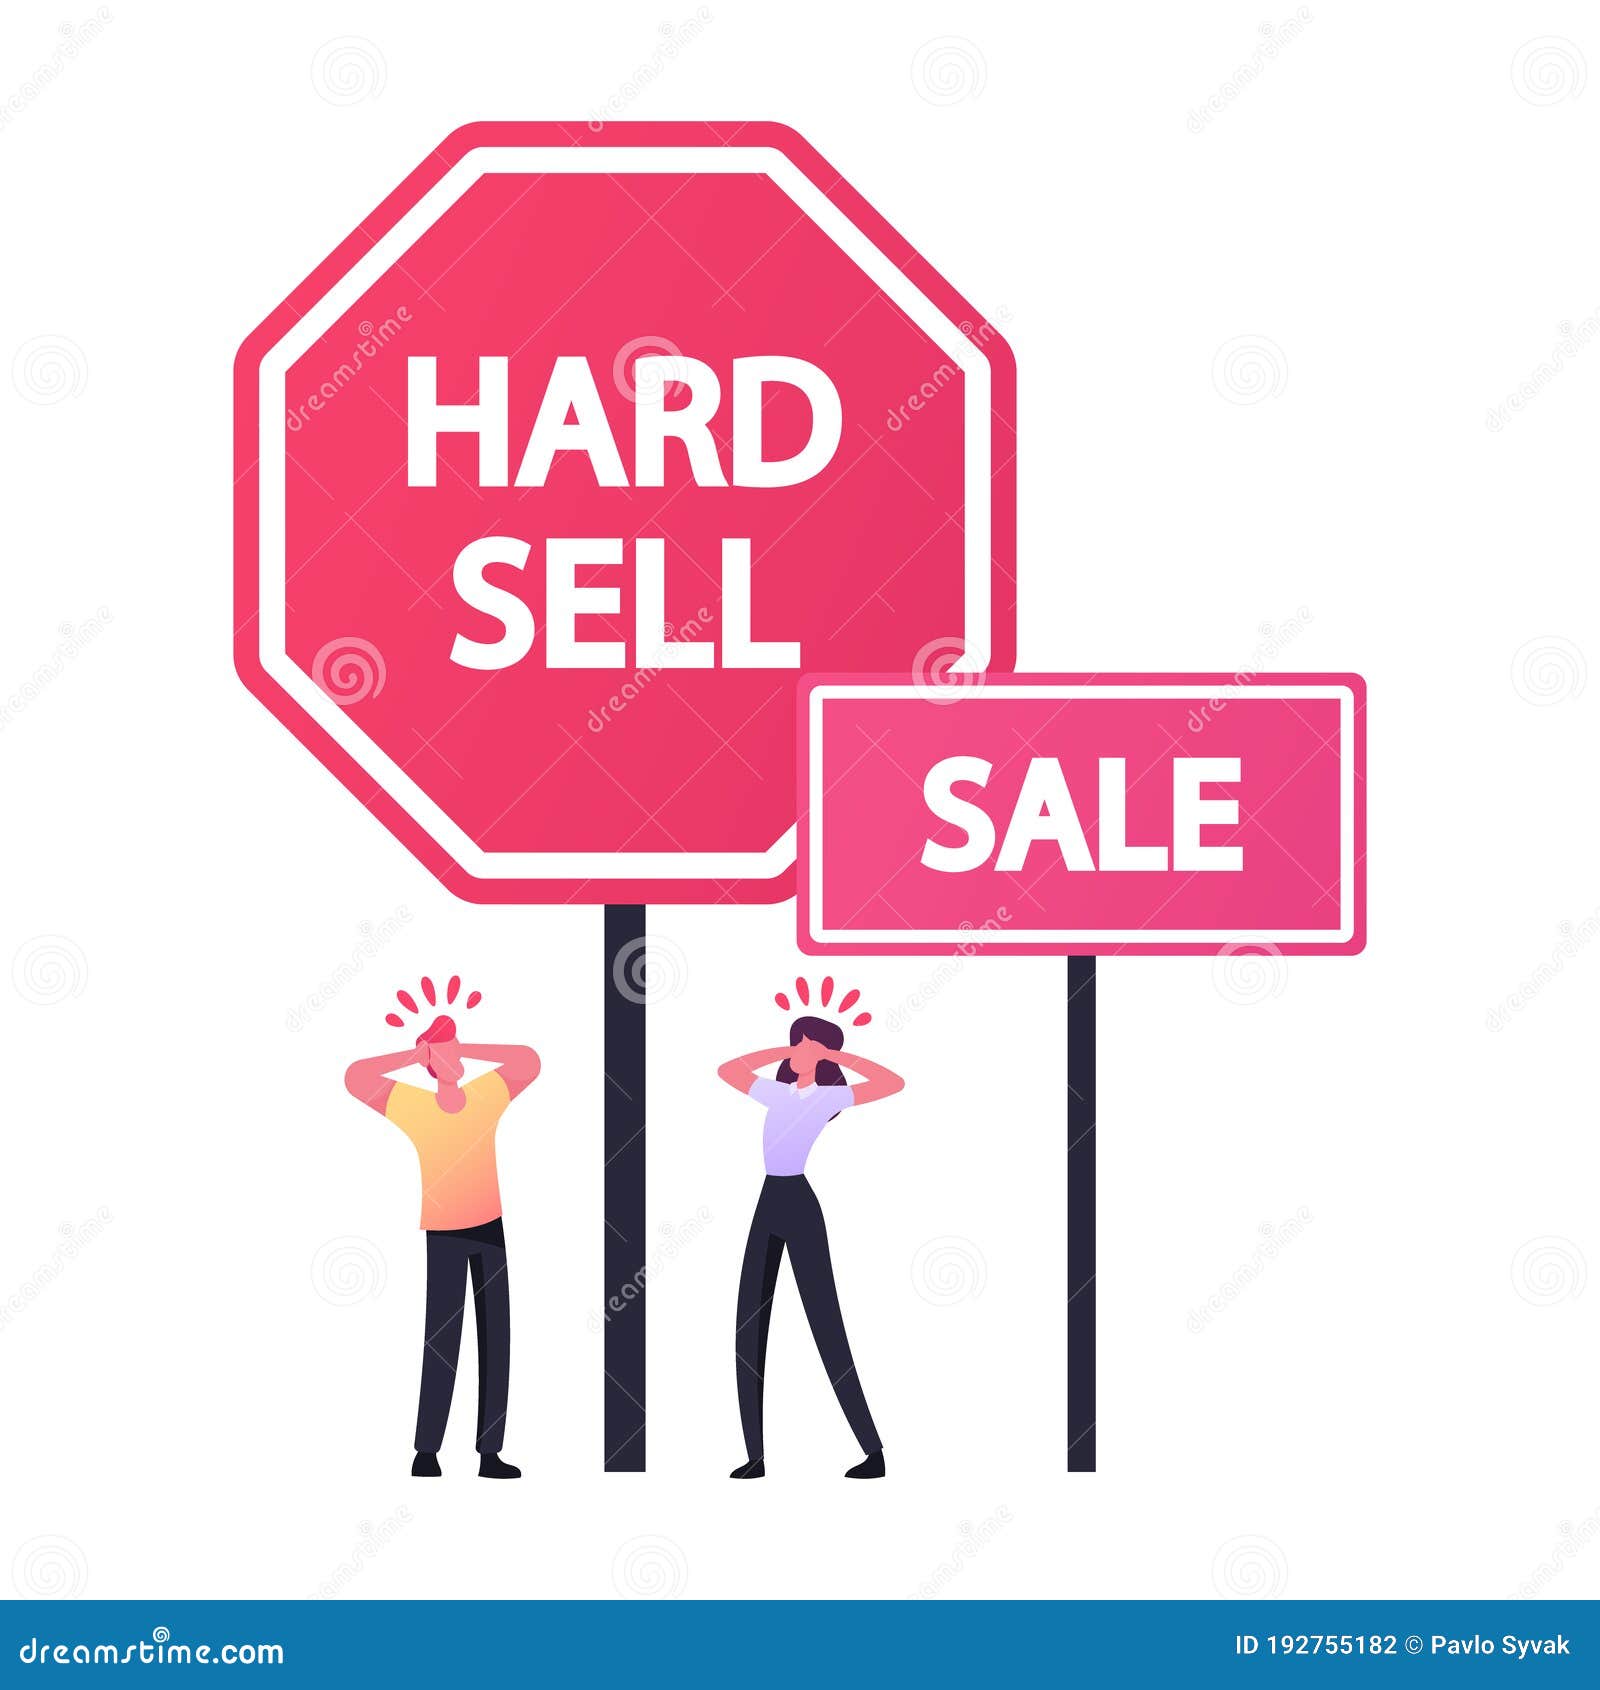 tiny male and female characters suffer of intrusive adware stand at huge hard sell and sale promo advertisement banners